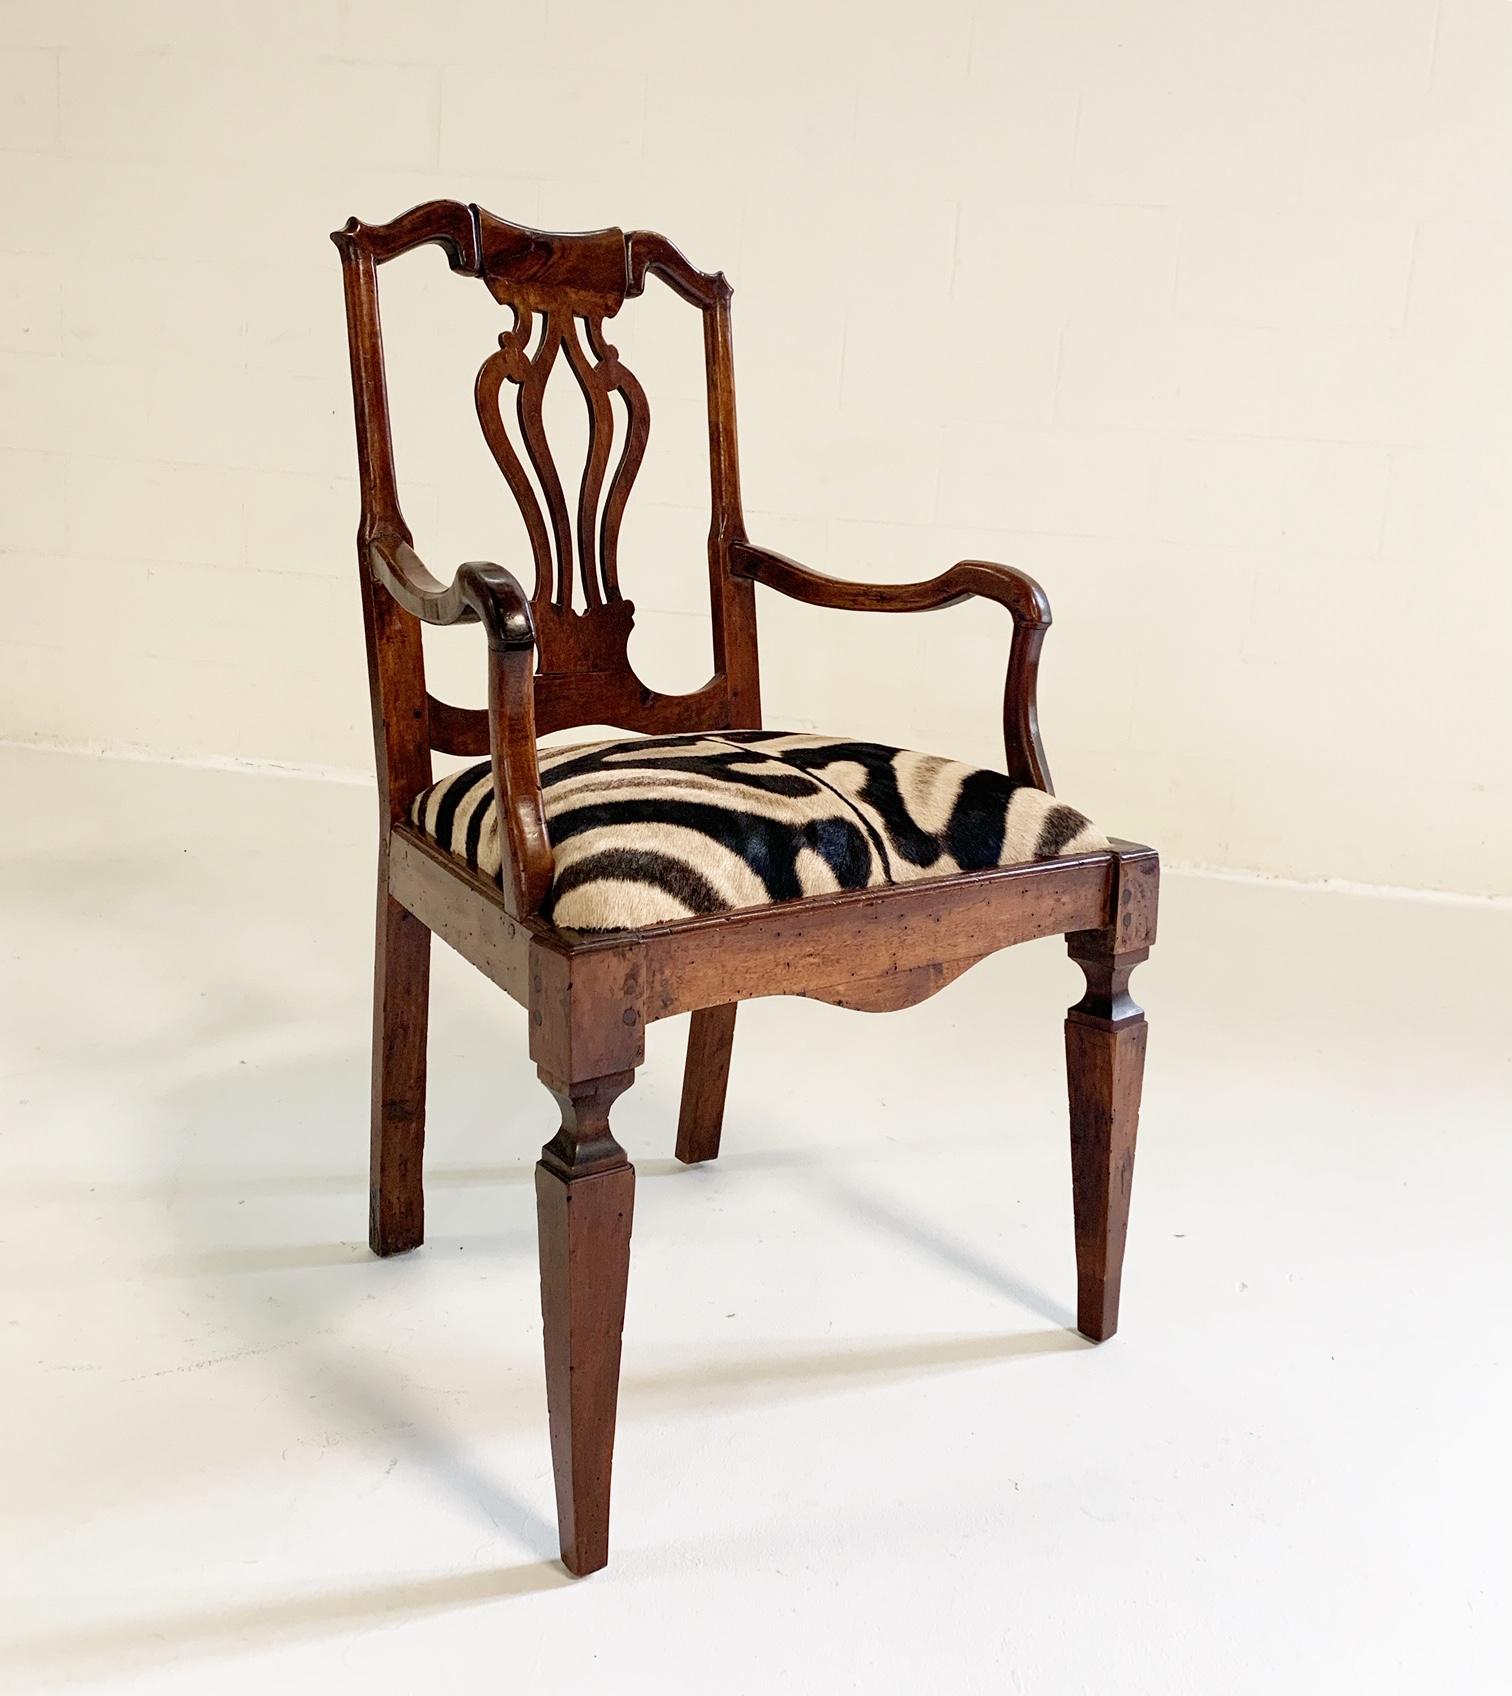 This chair is wonderful. Over 200 years old and it is still in outstanding shape. The Dutch walnut open armchair has a yoke-shaped crest rail over a pierced vase-shaped splat and shepherd's crook arms. The restored zebra hide seat is supported by a